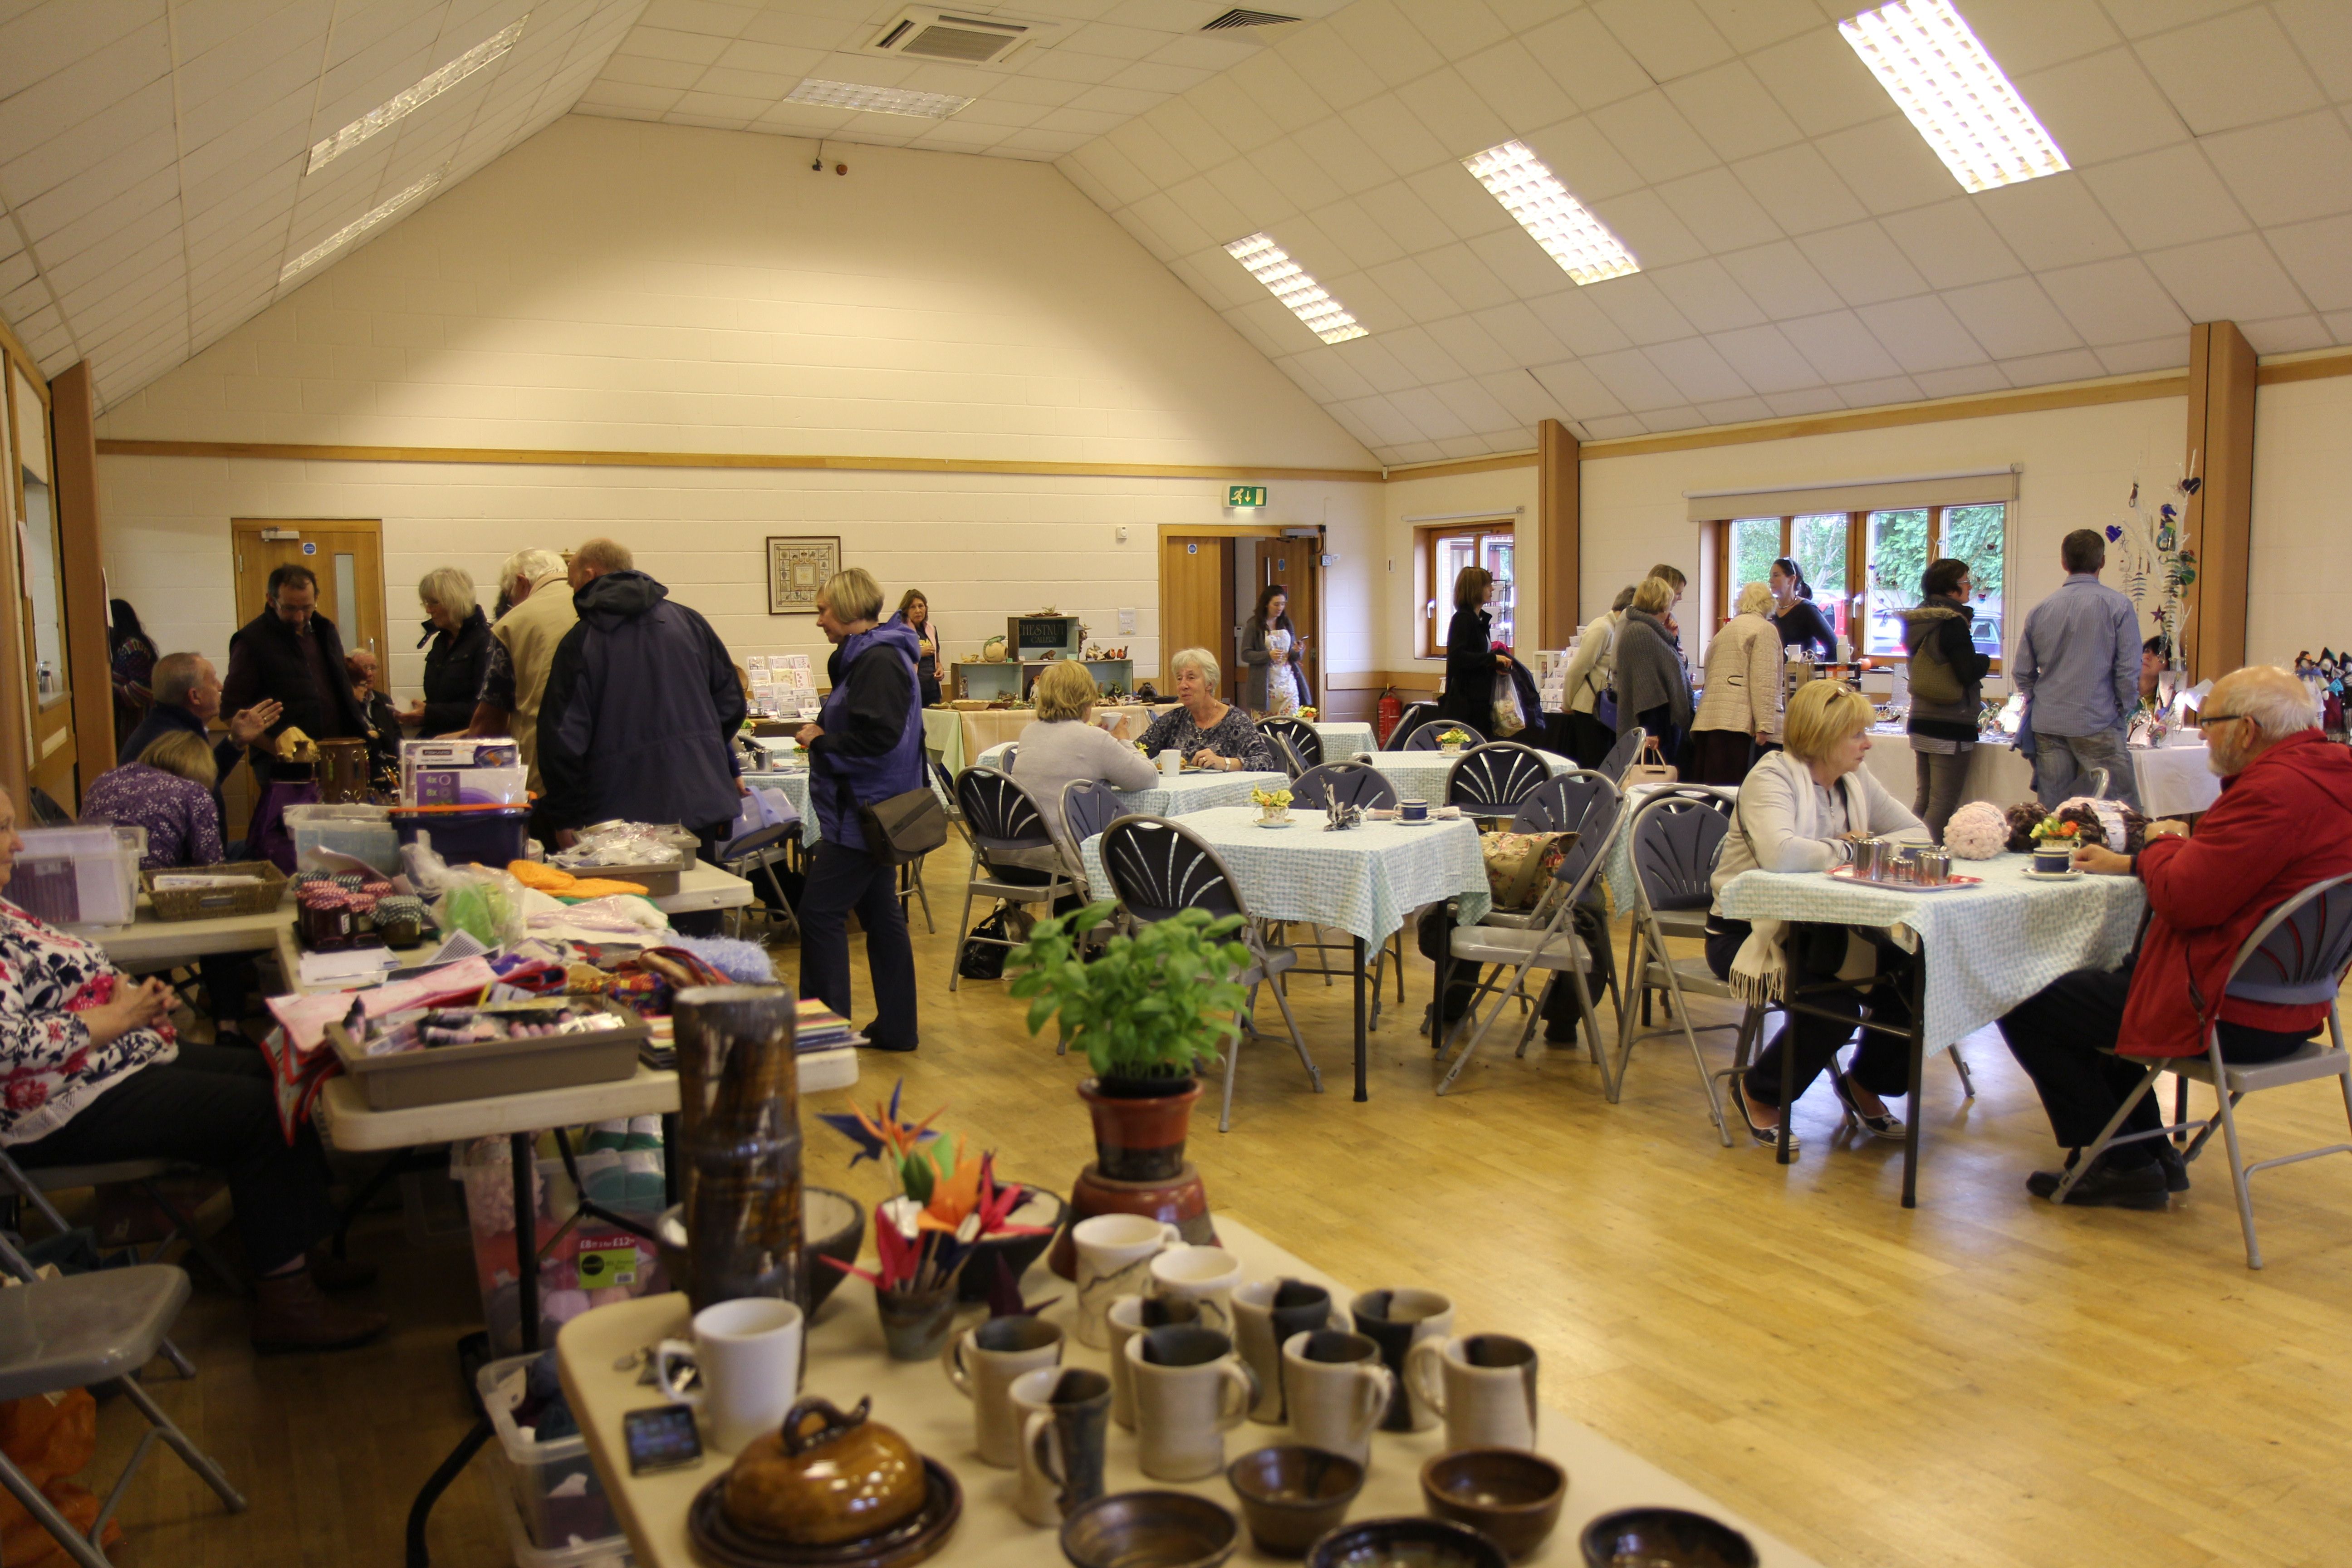 Kings Sutton Village Hall being used for Arts & Crafts Exhibition